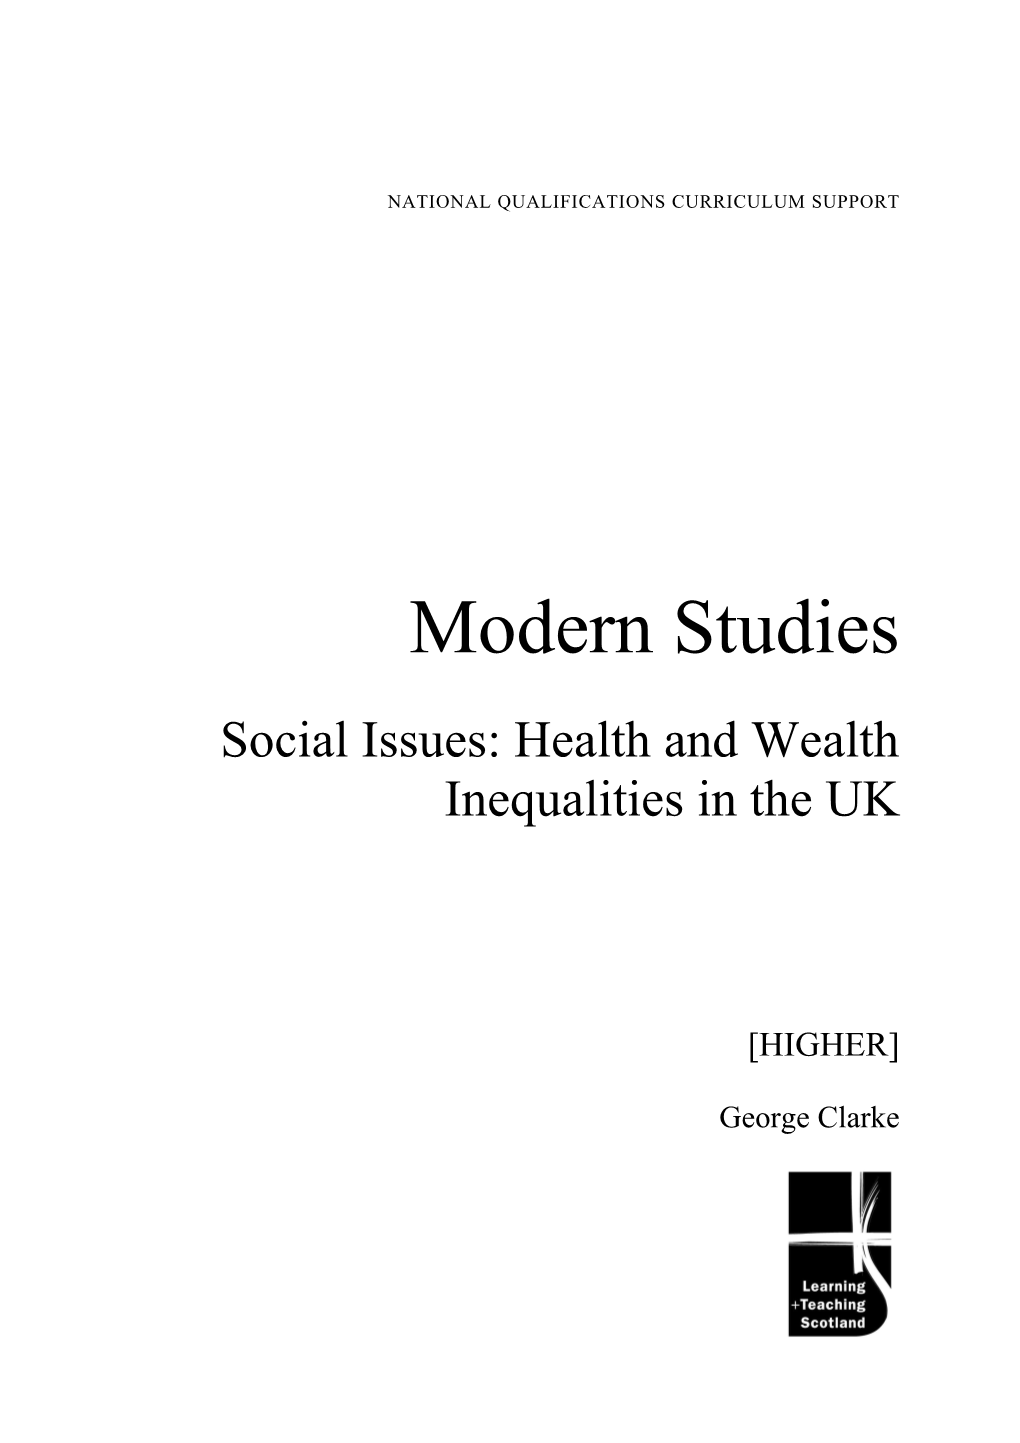 Modern Studies: Social Issues - Health and Wealth Inequalities in the UK